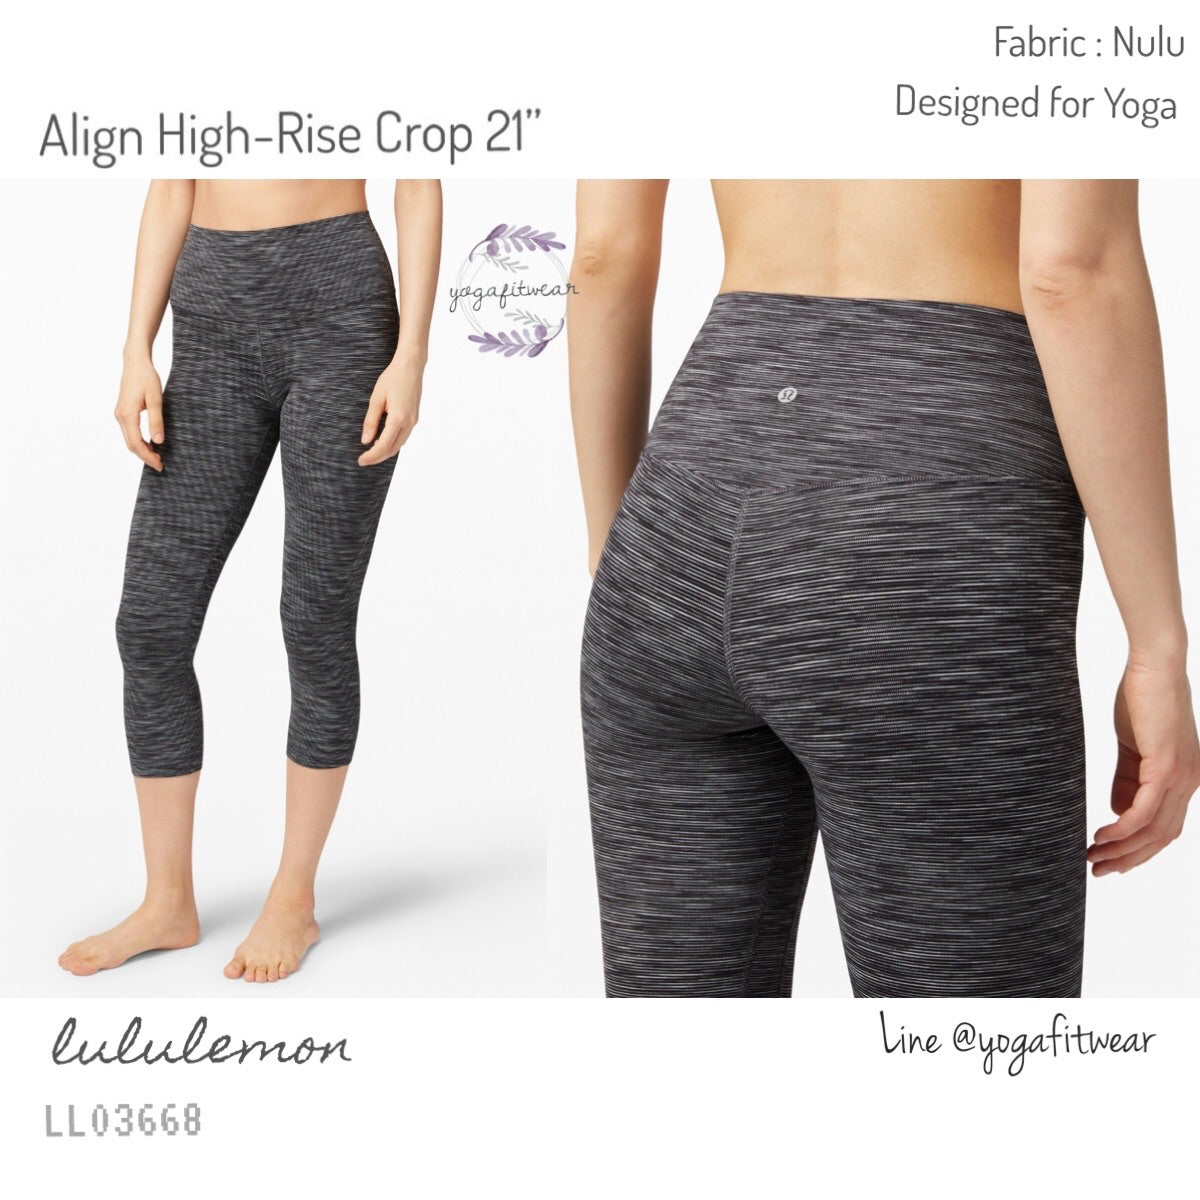 Lululemon : Align High-Rise Crop 21” (wee are from space dark carbon i –  Yogafitwear